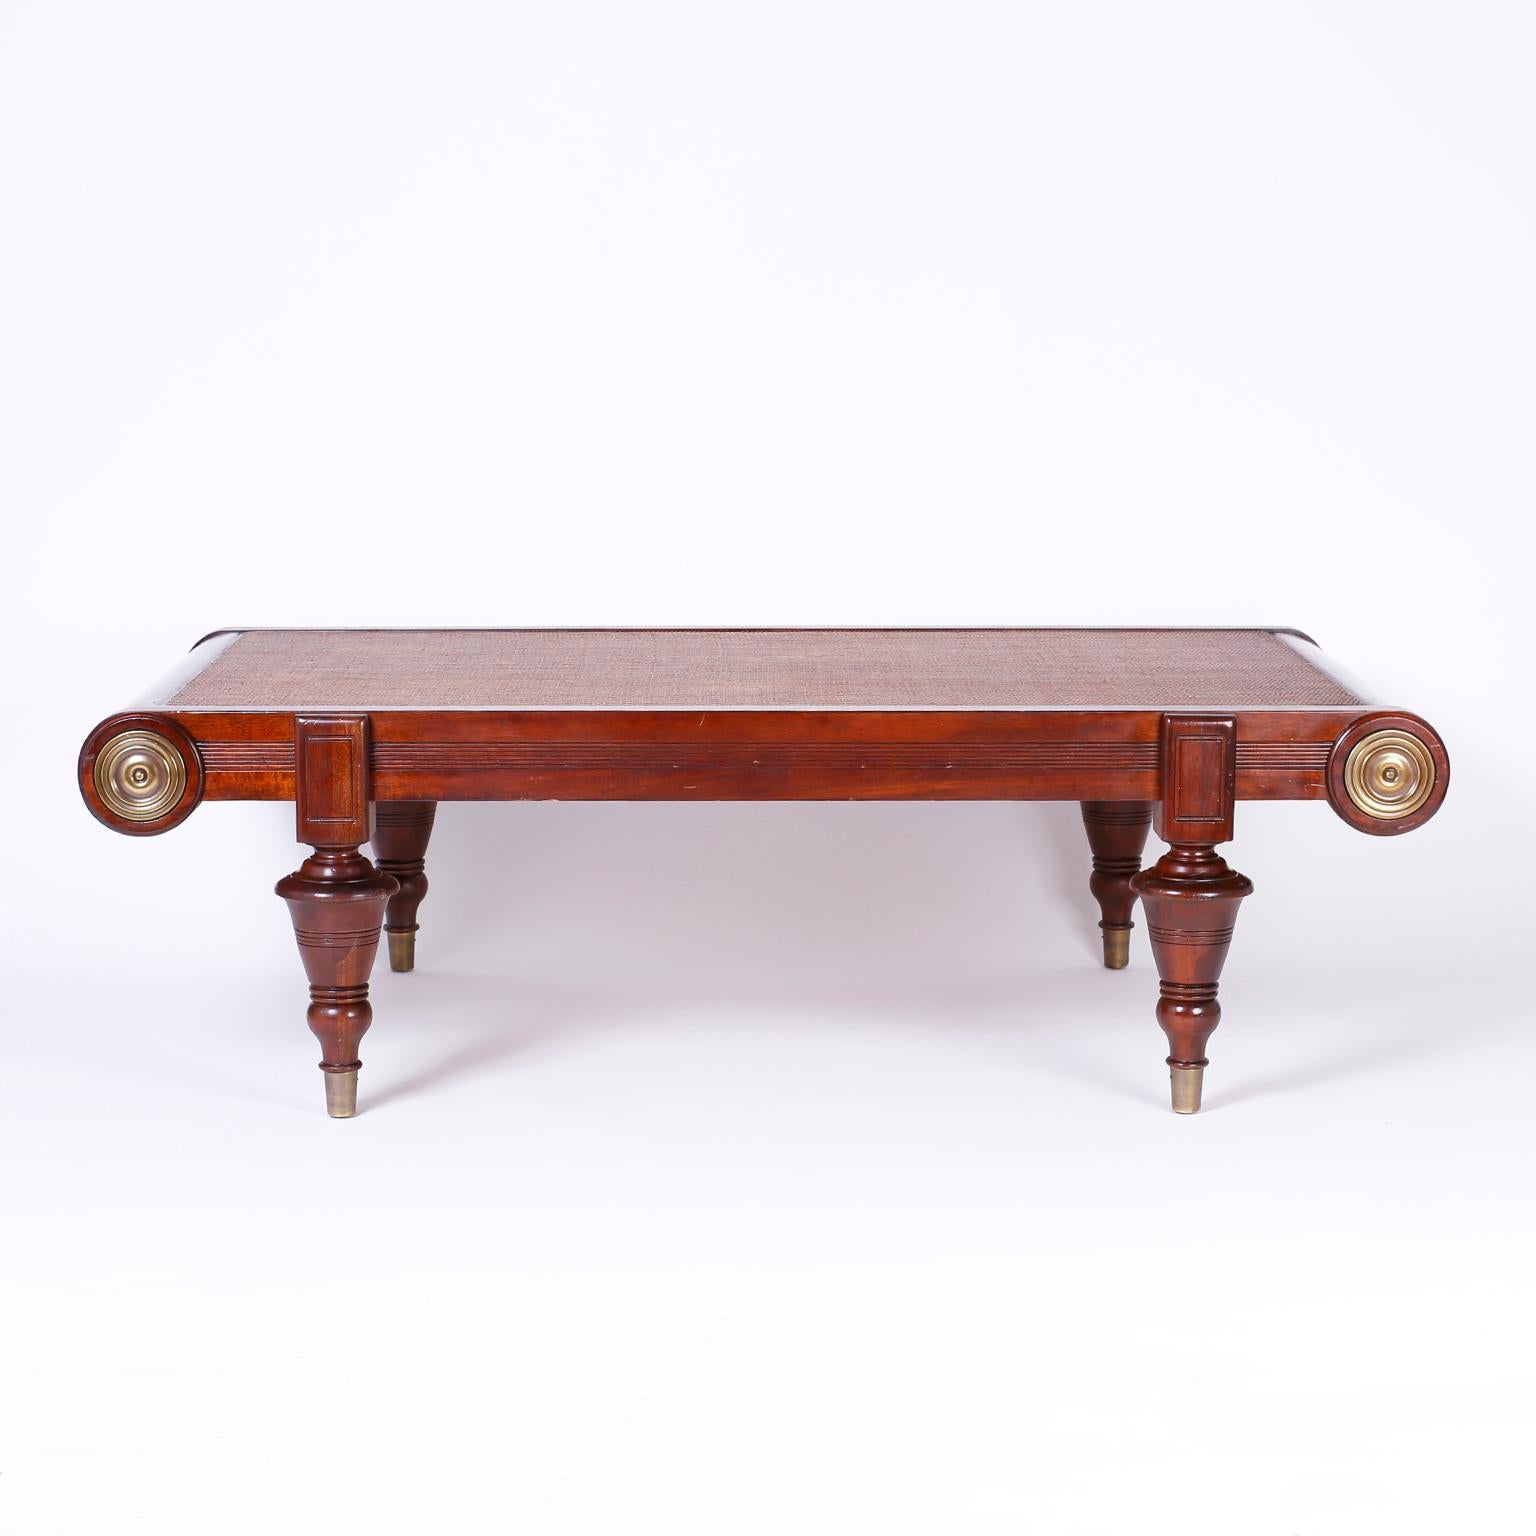 Refined British Colonial coffee table crafted in mahogany with a grass cloth top, Classic form, brass medallions and bold turned legs on brass feet.